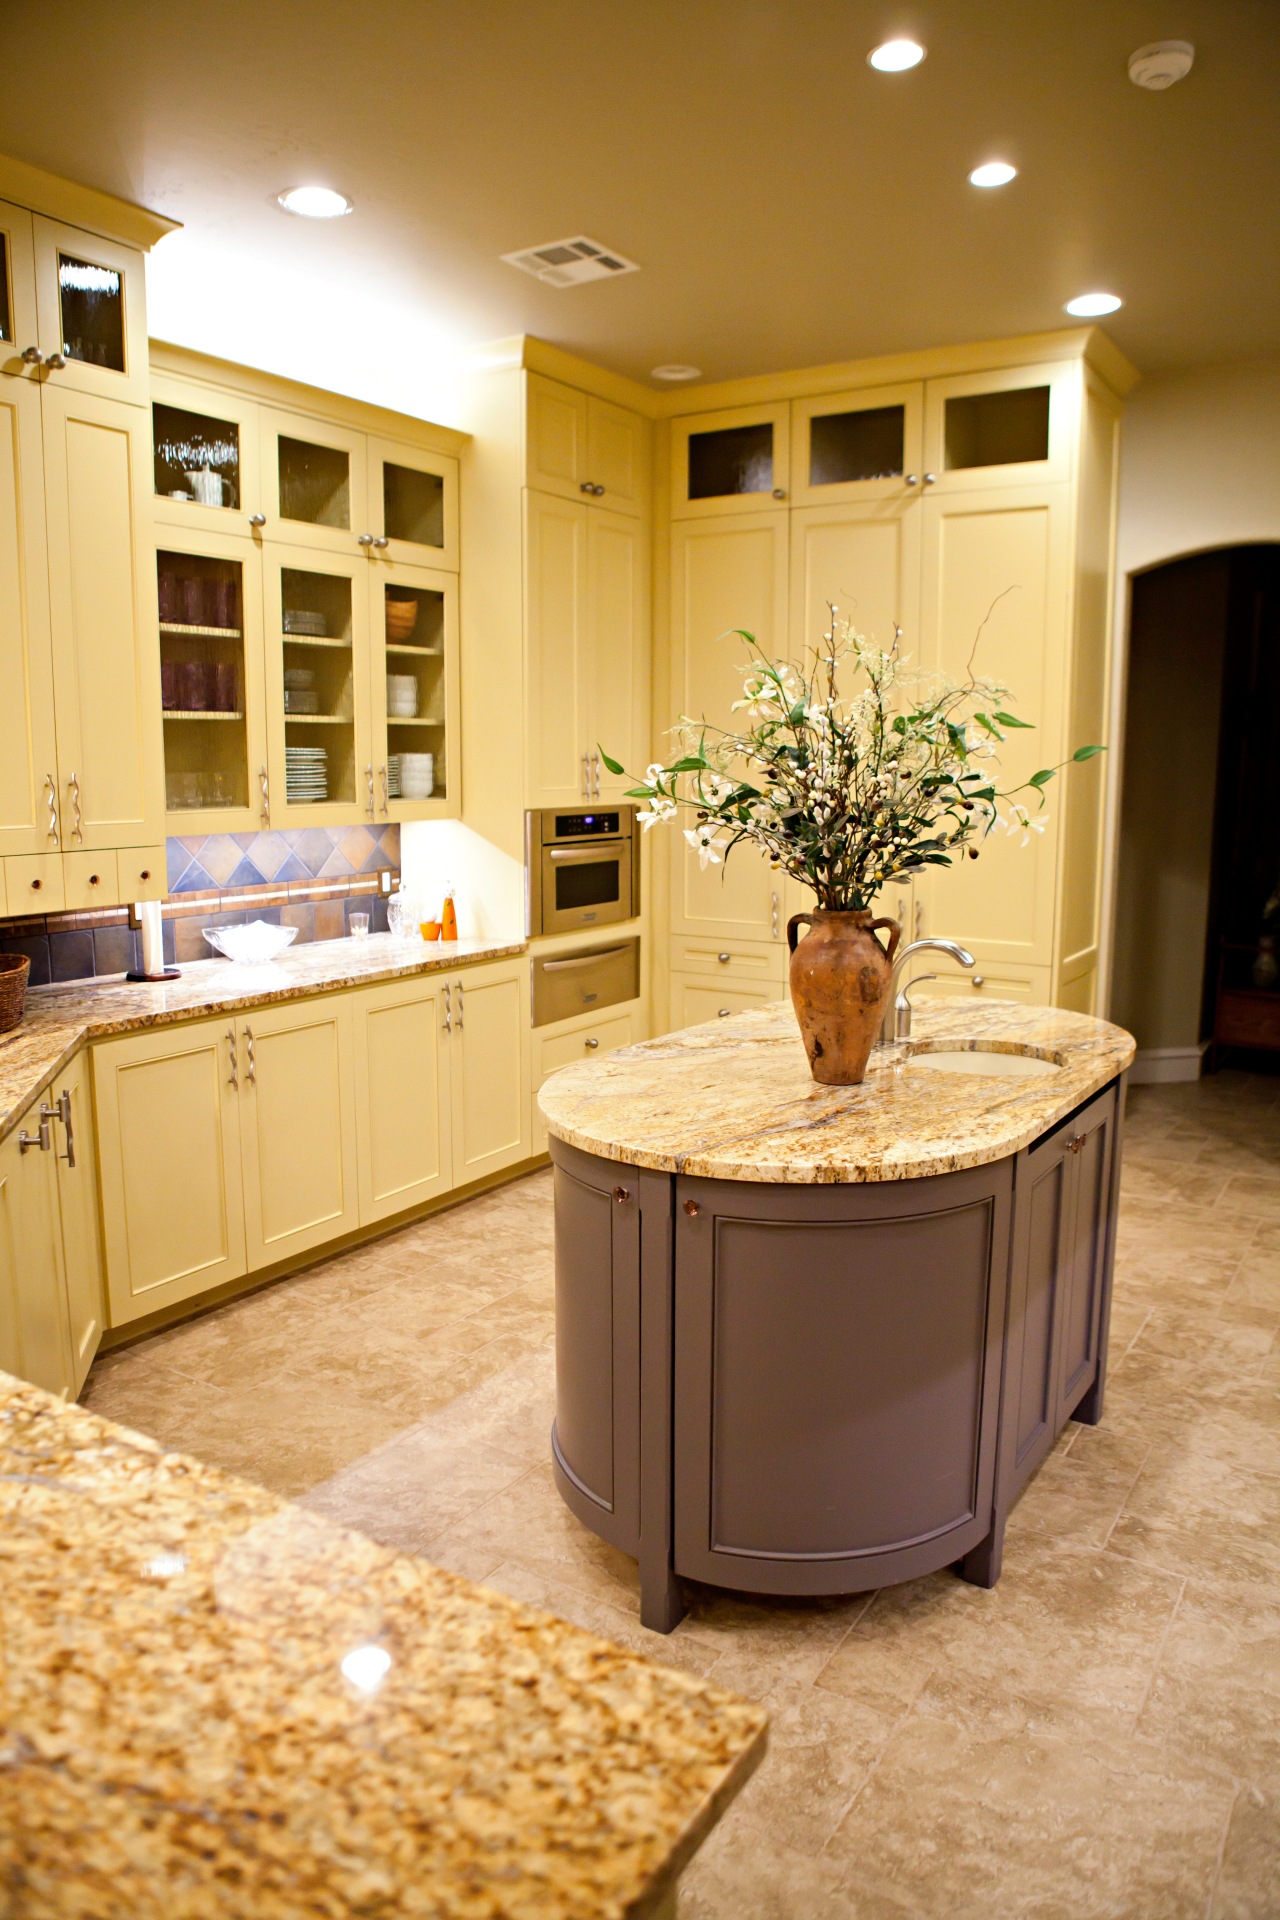 kitchen with oval countertop in the middle